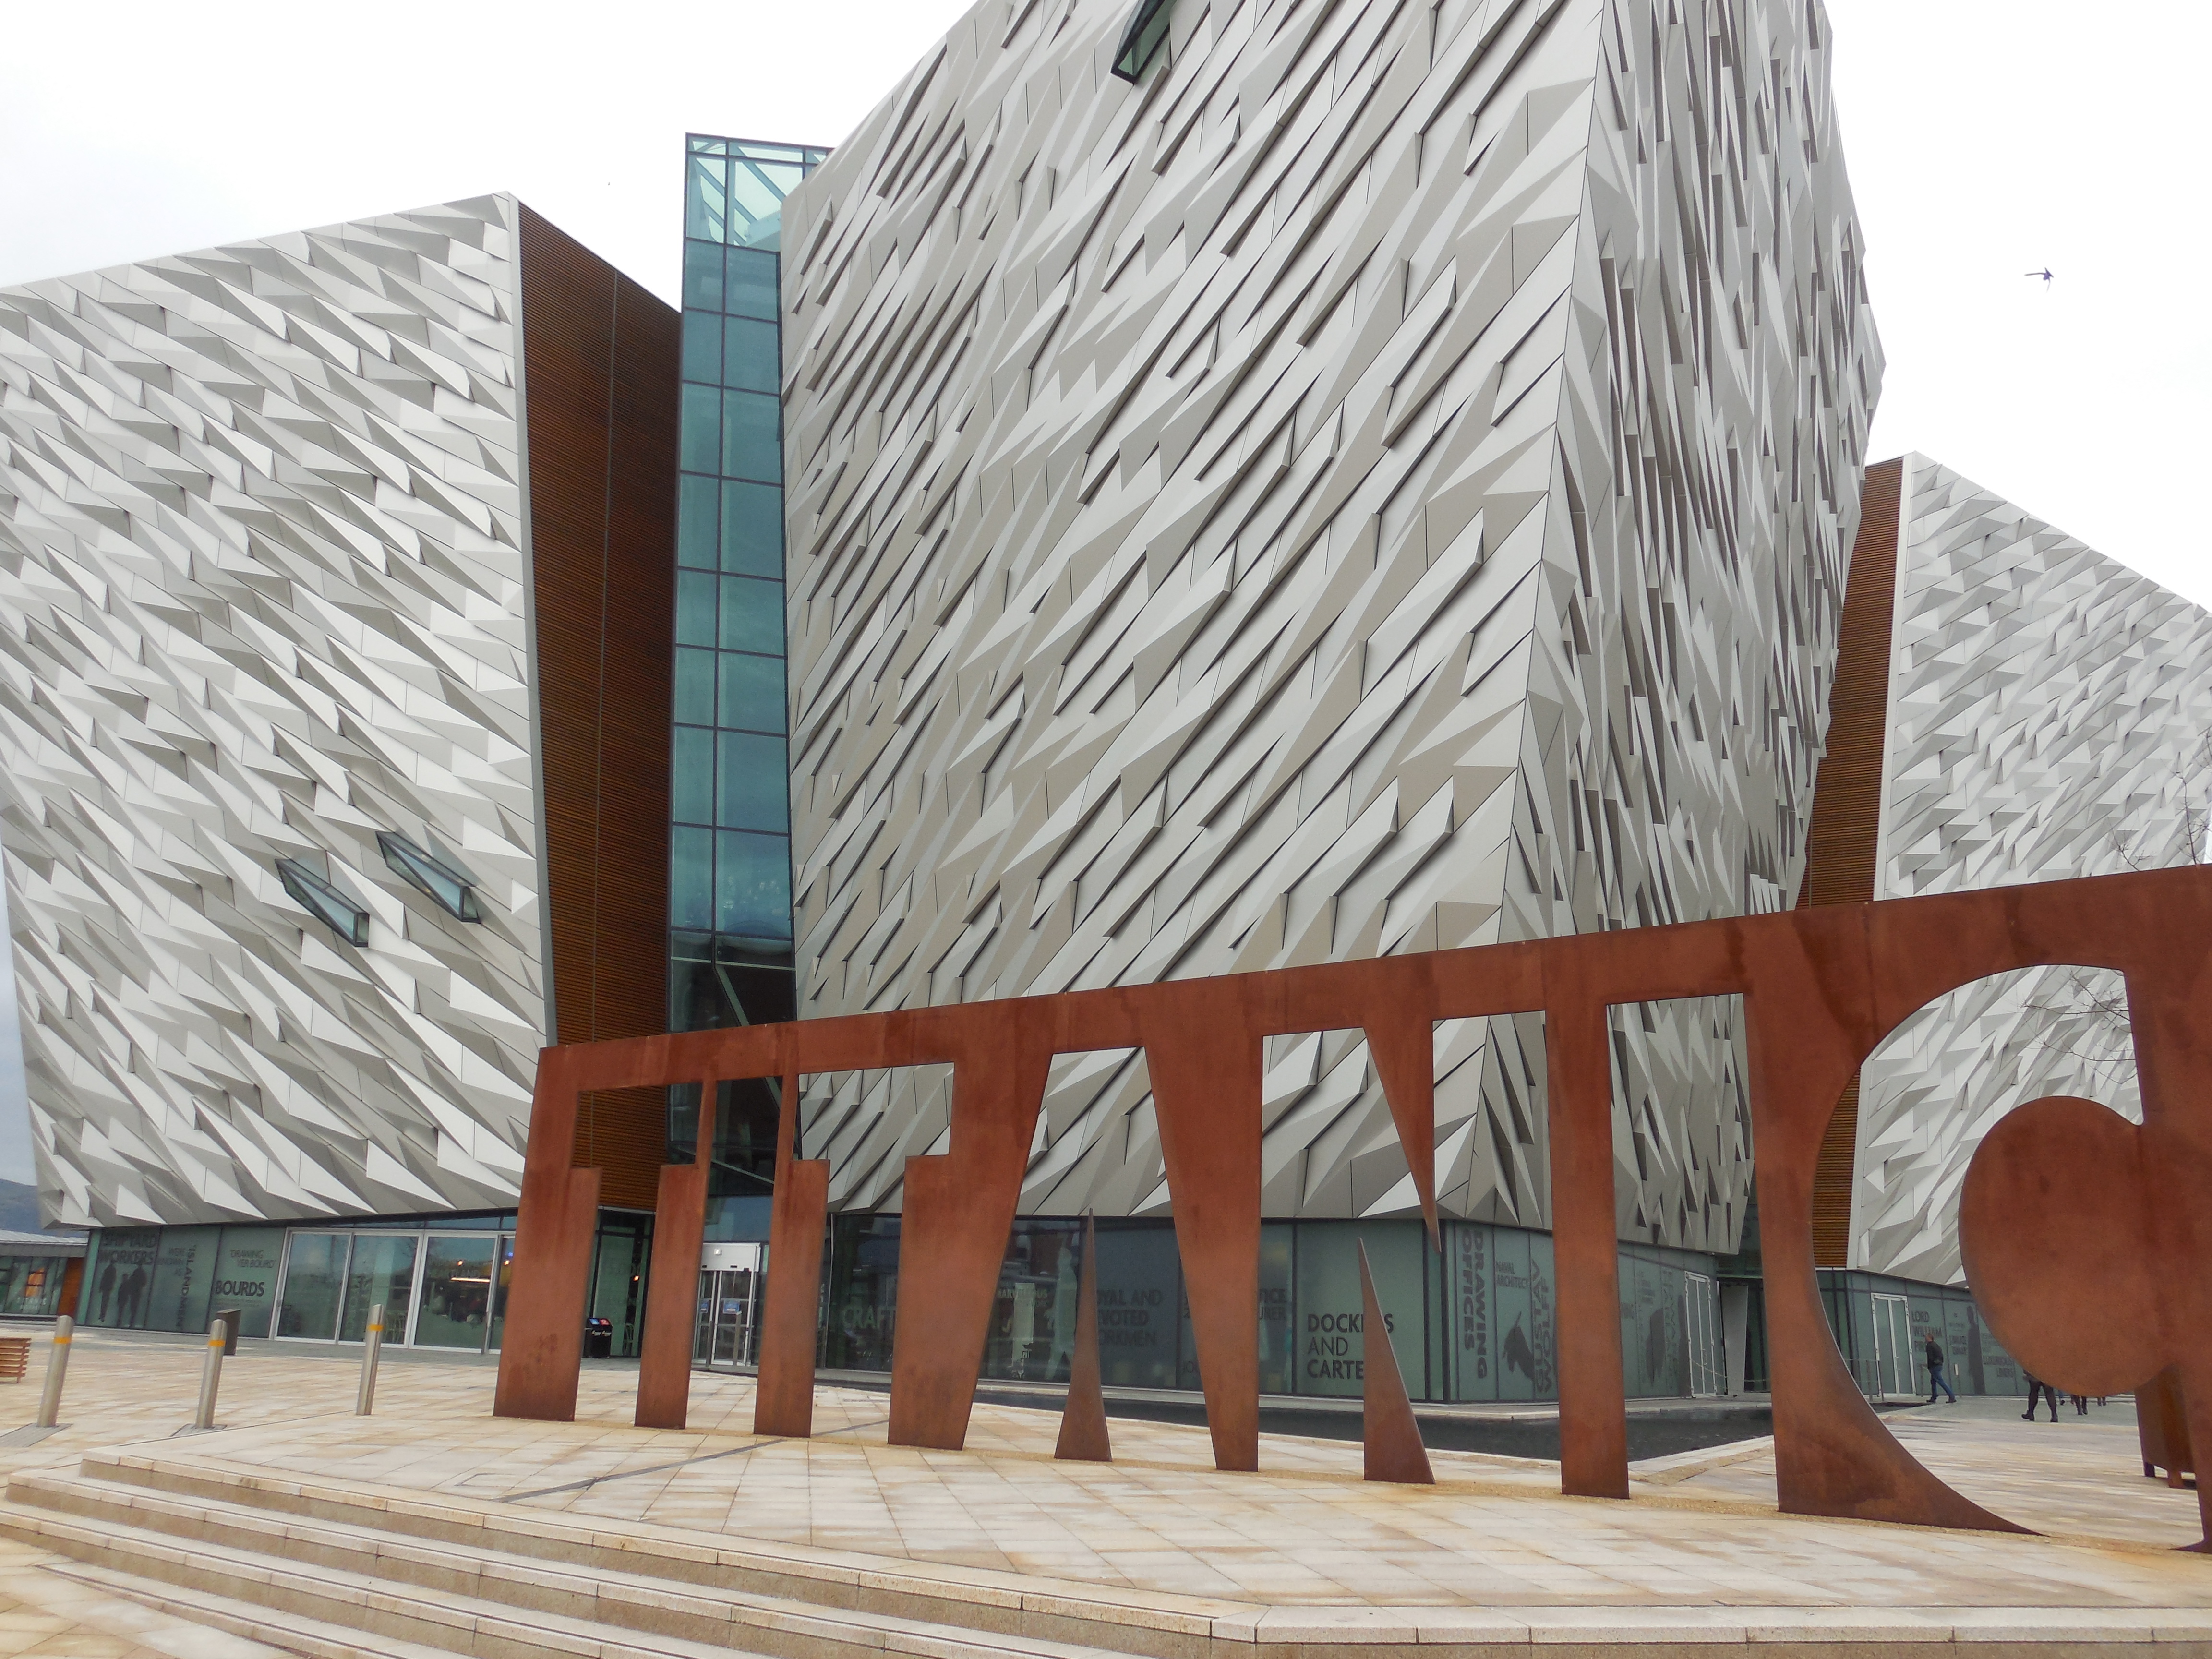 The Titanic Museum in Belfast where the Titanic was actually built!